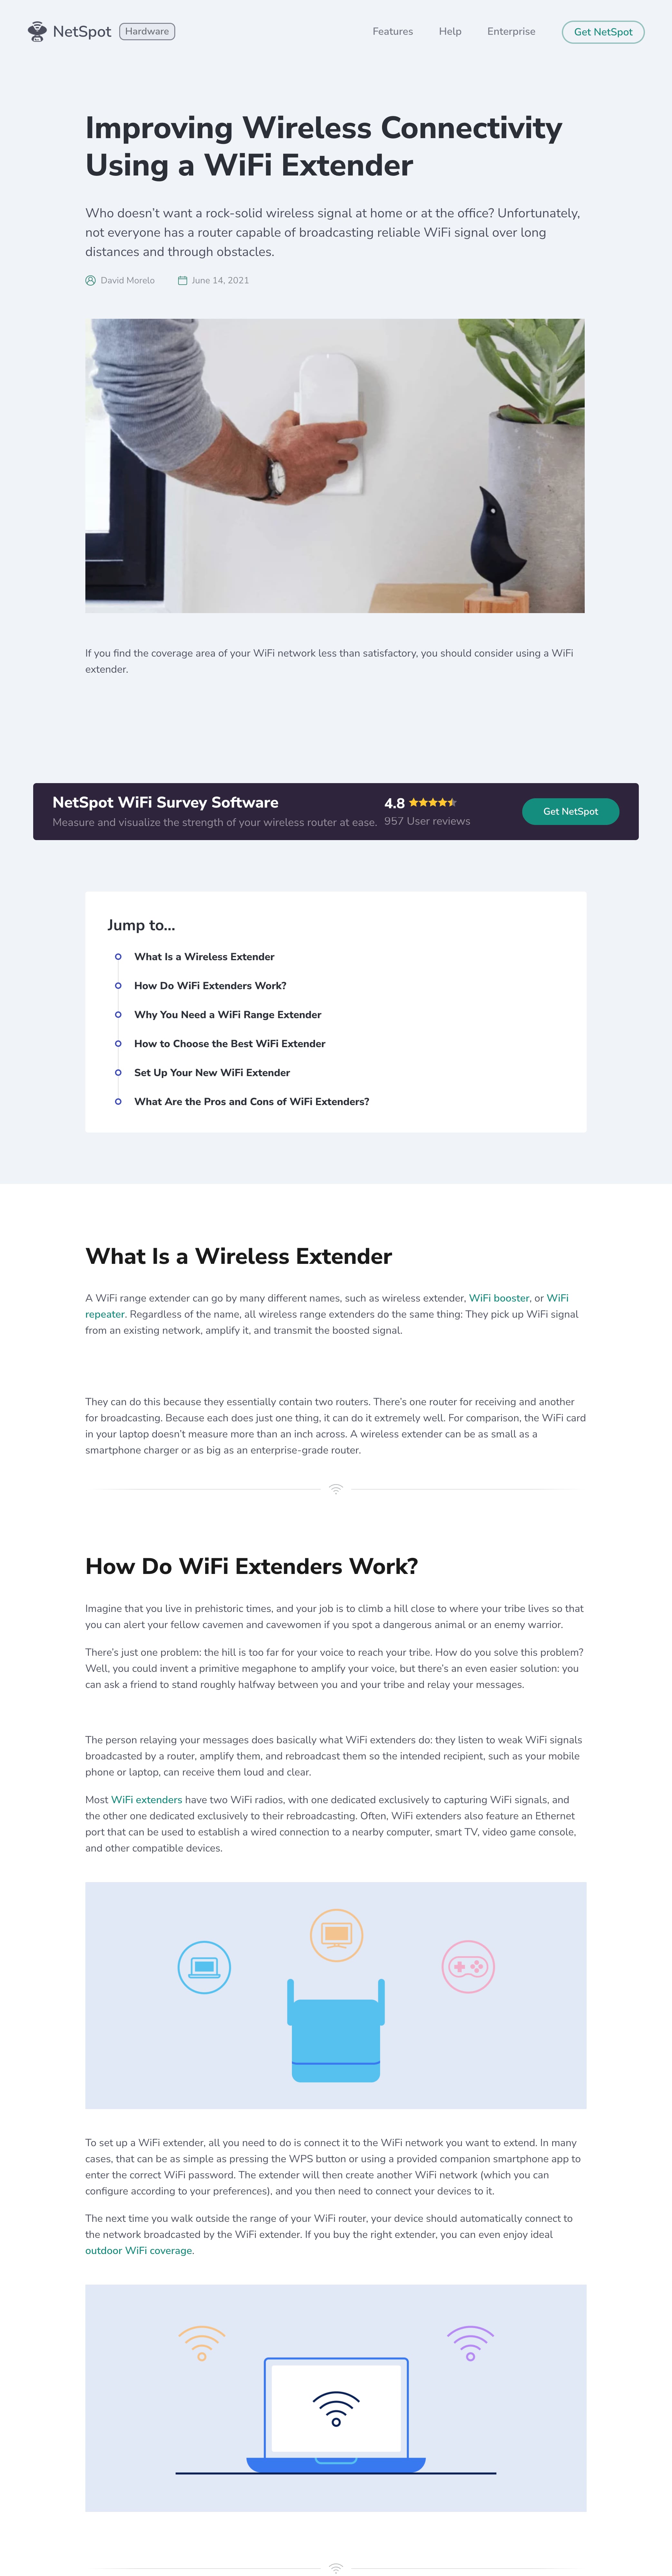 Improving Wireless Connectivity Using a WiFi Extender